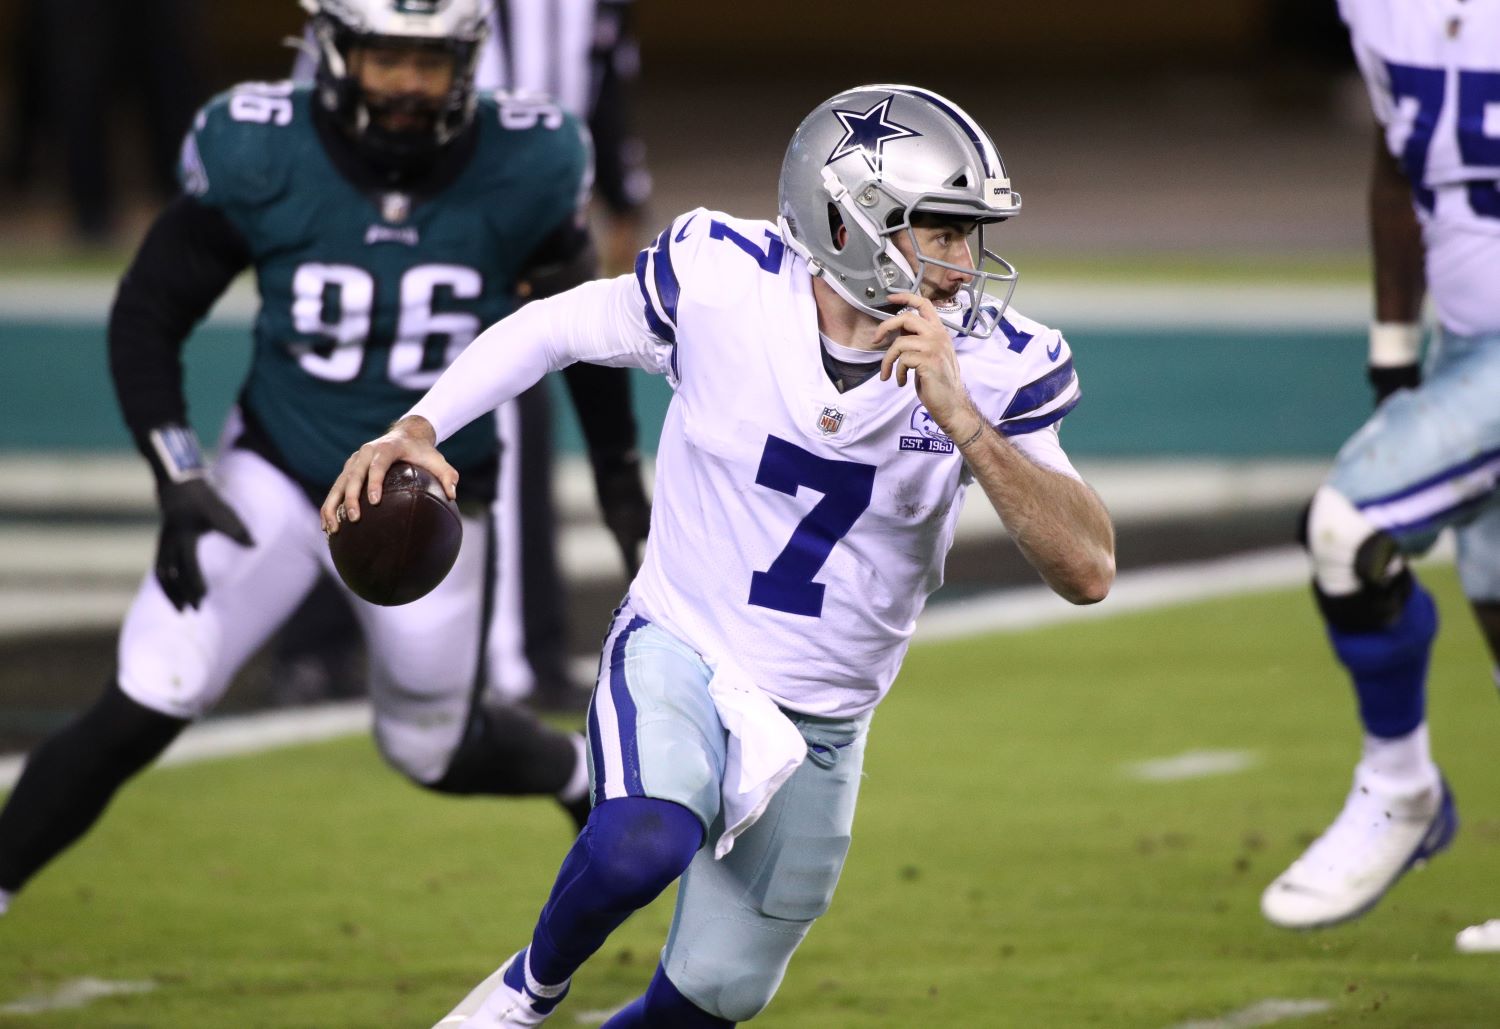 The Dallas Cowboys may bench quarterback Ben DiNucci for Cooper Rush, who has completed just one pass since entering the NFL in 2017.